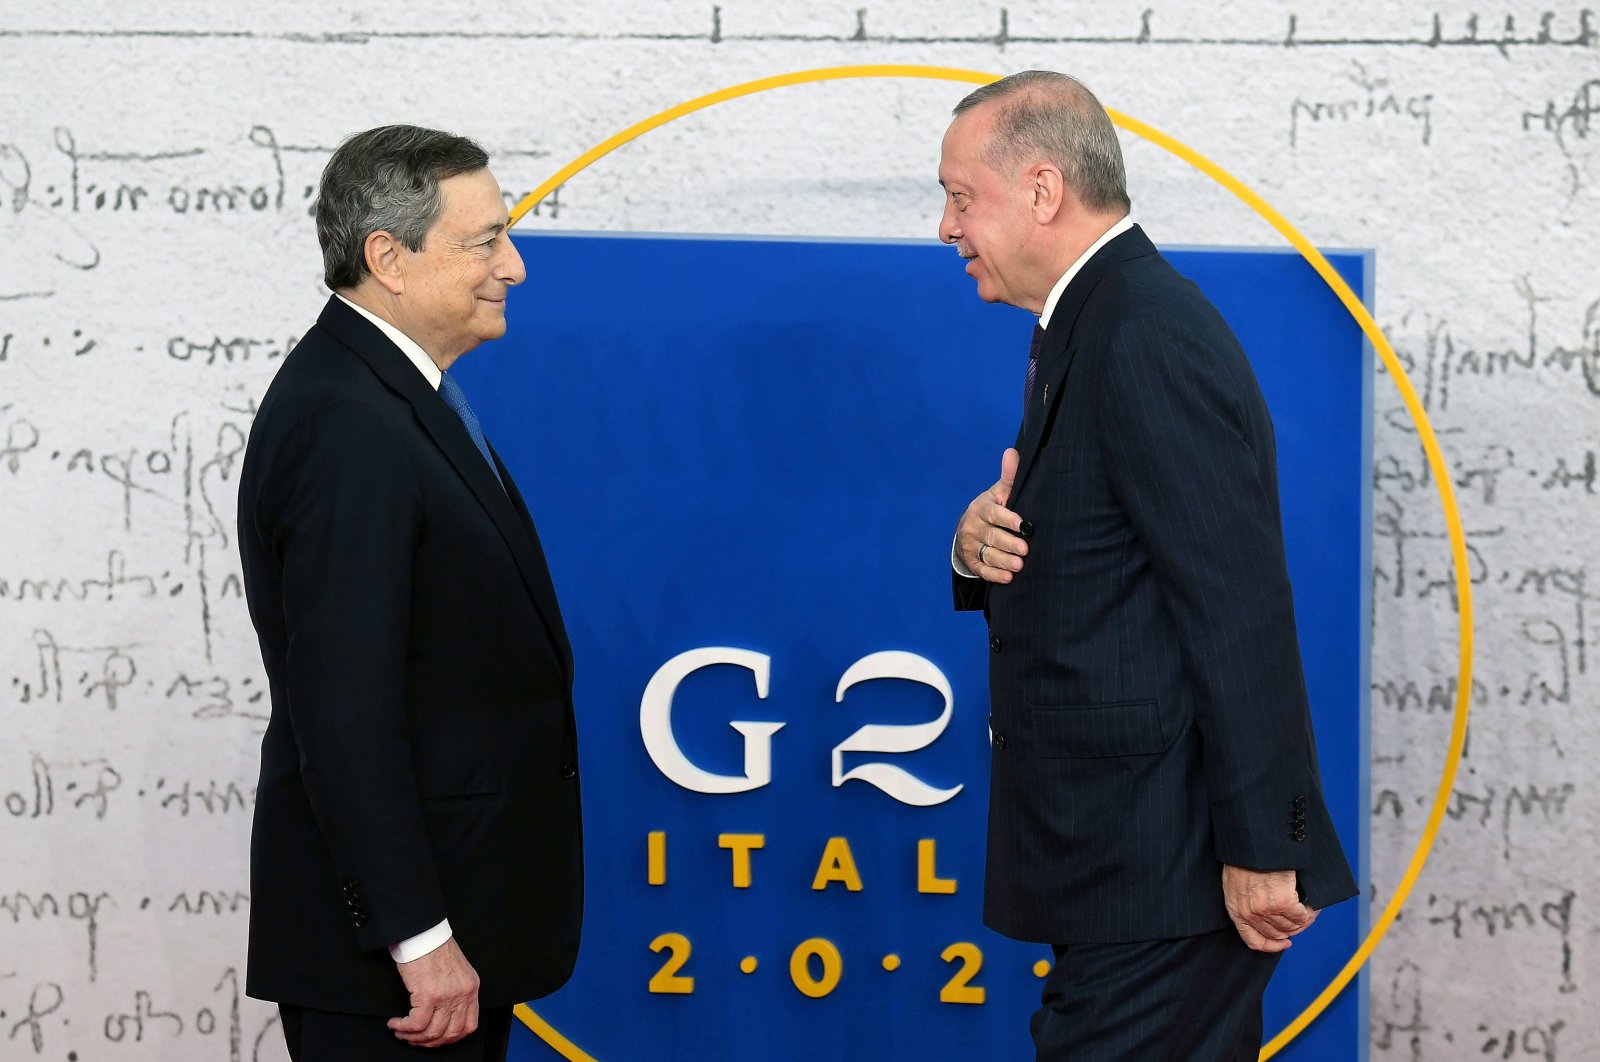 Italian Prime Minister Mario Draghi (L) welcomes President Recep Tayyip Erdoğan as he arrives for the G-20 Leaders' Summit at La Nuvola Congress Centre in Rome, Italy, Oct. 30, 2021. (EPA Photo)